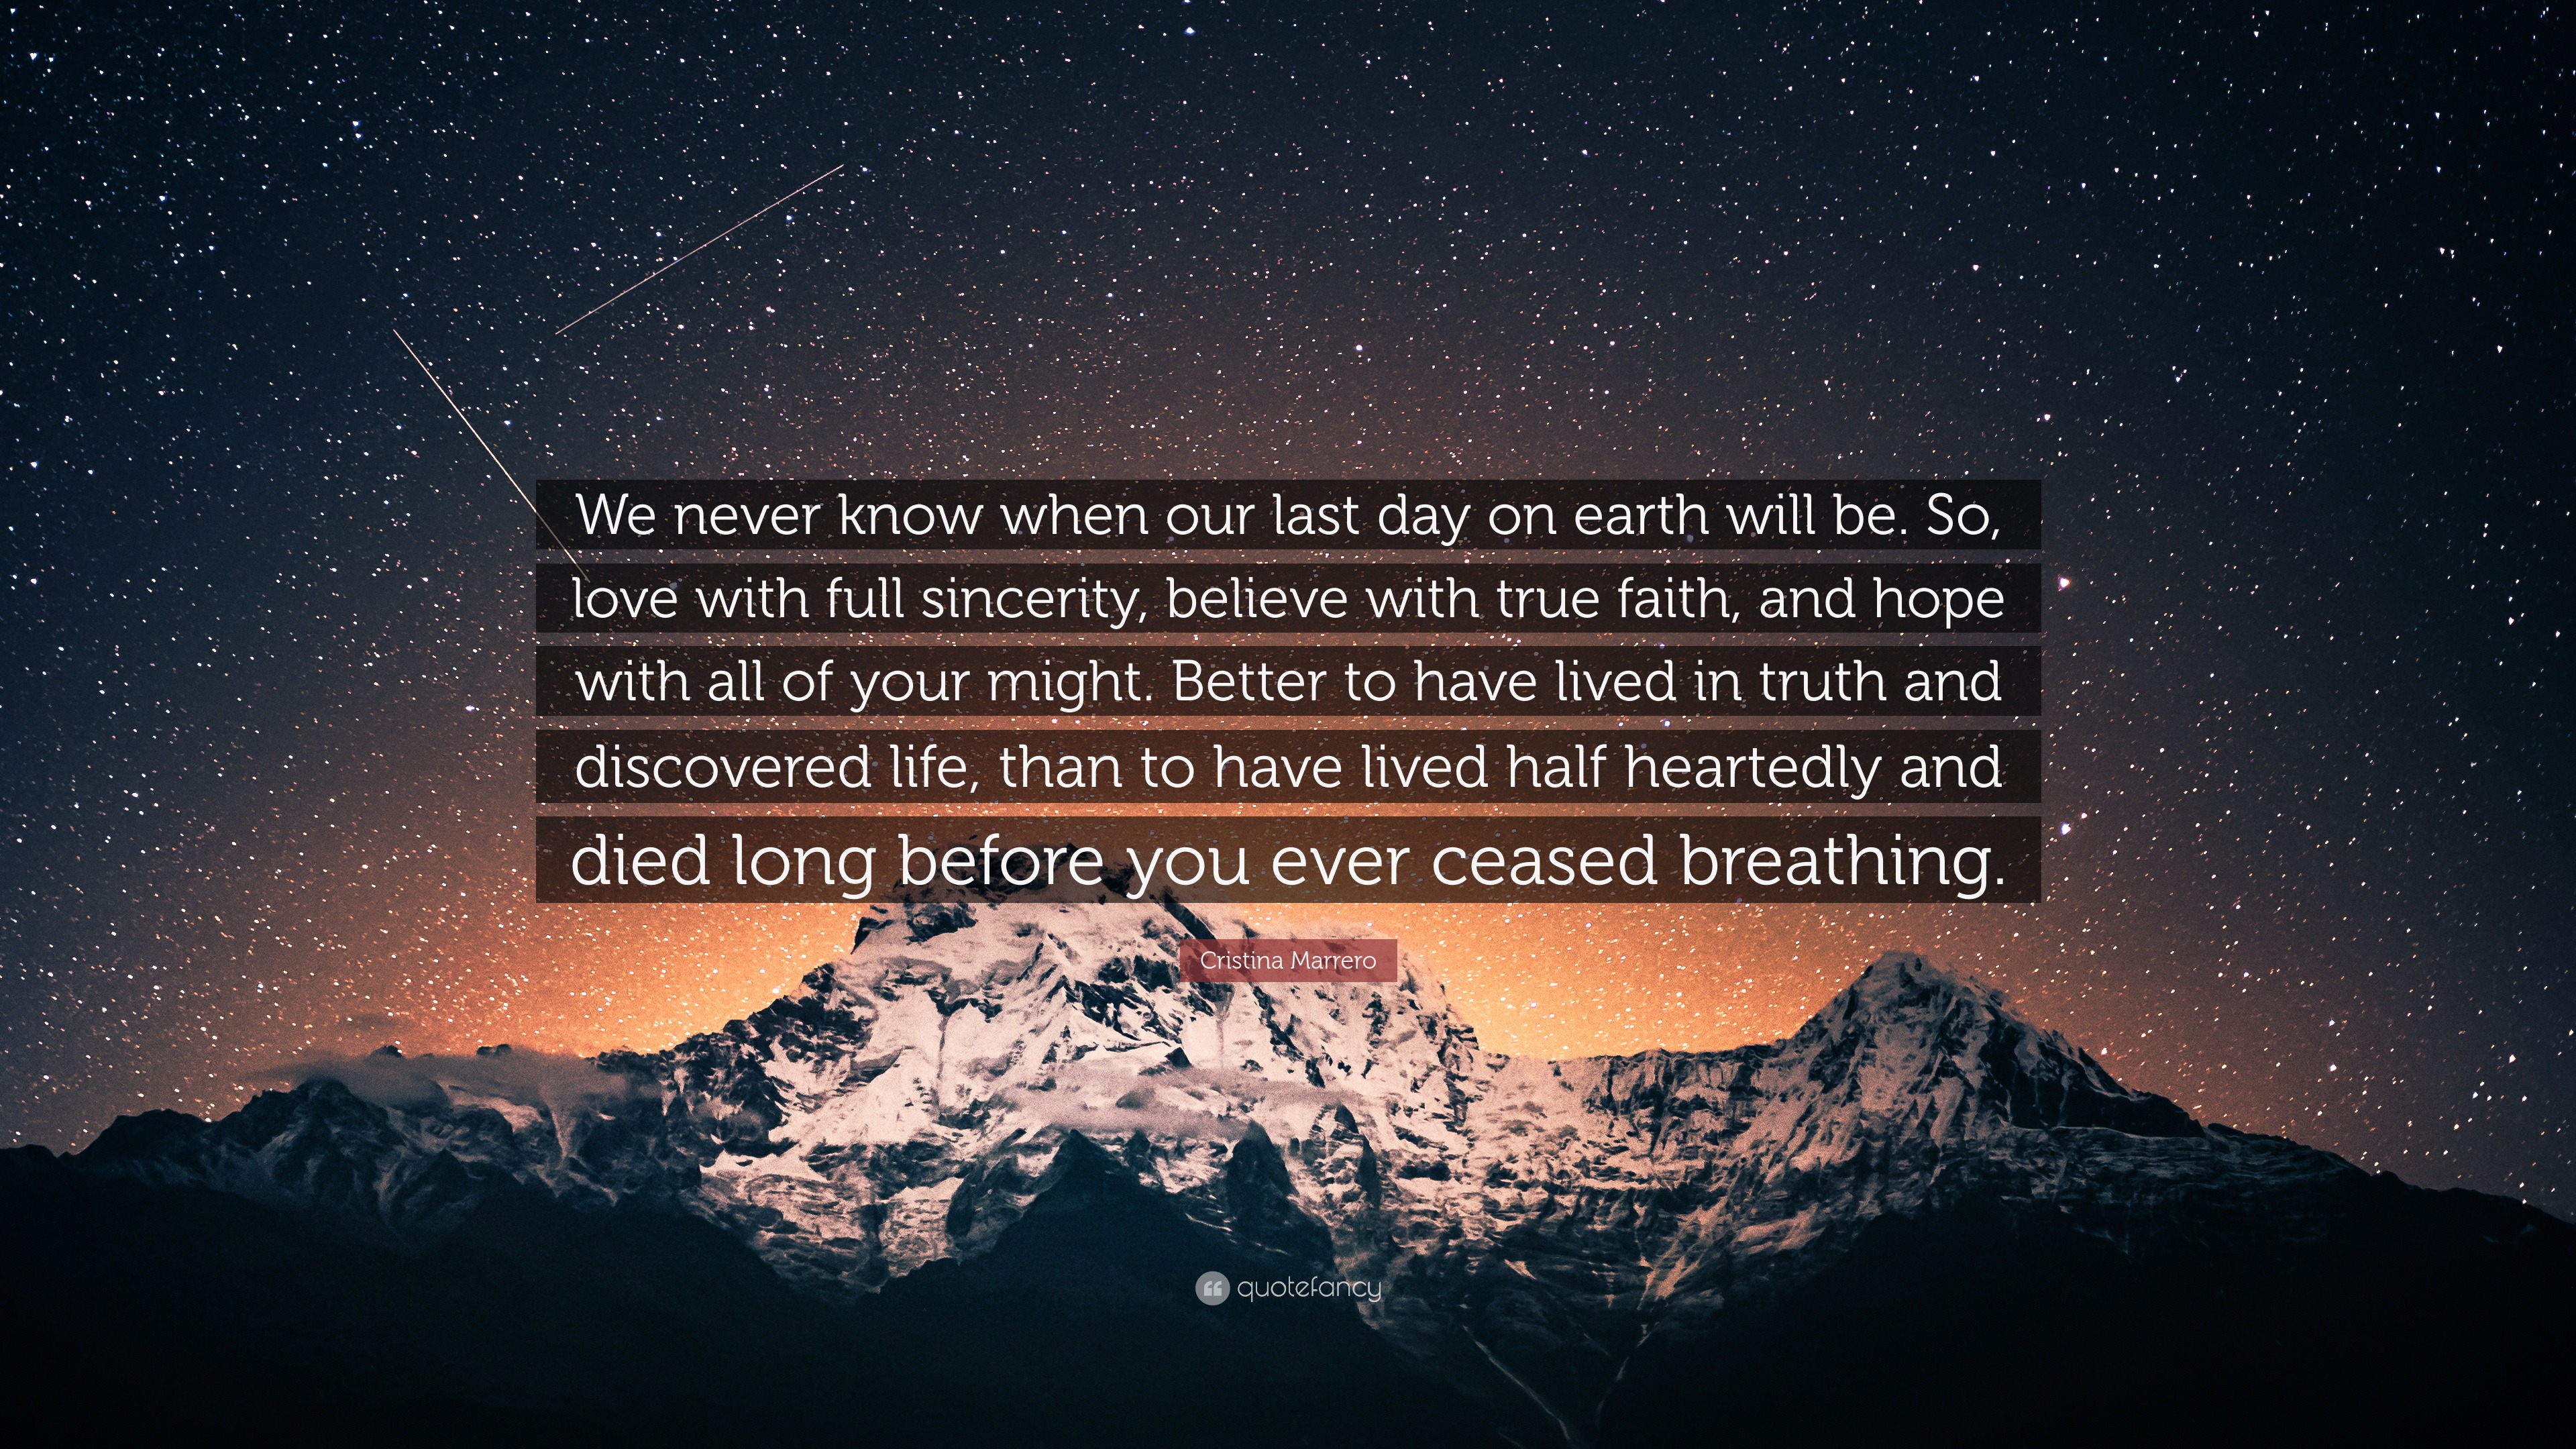 Cristina Marrero Quote “We never know when our last day on earth will be